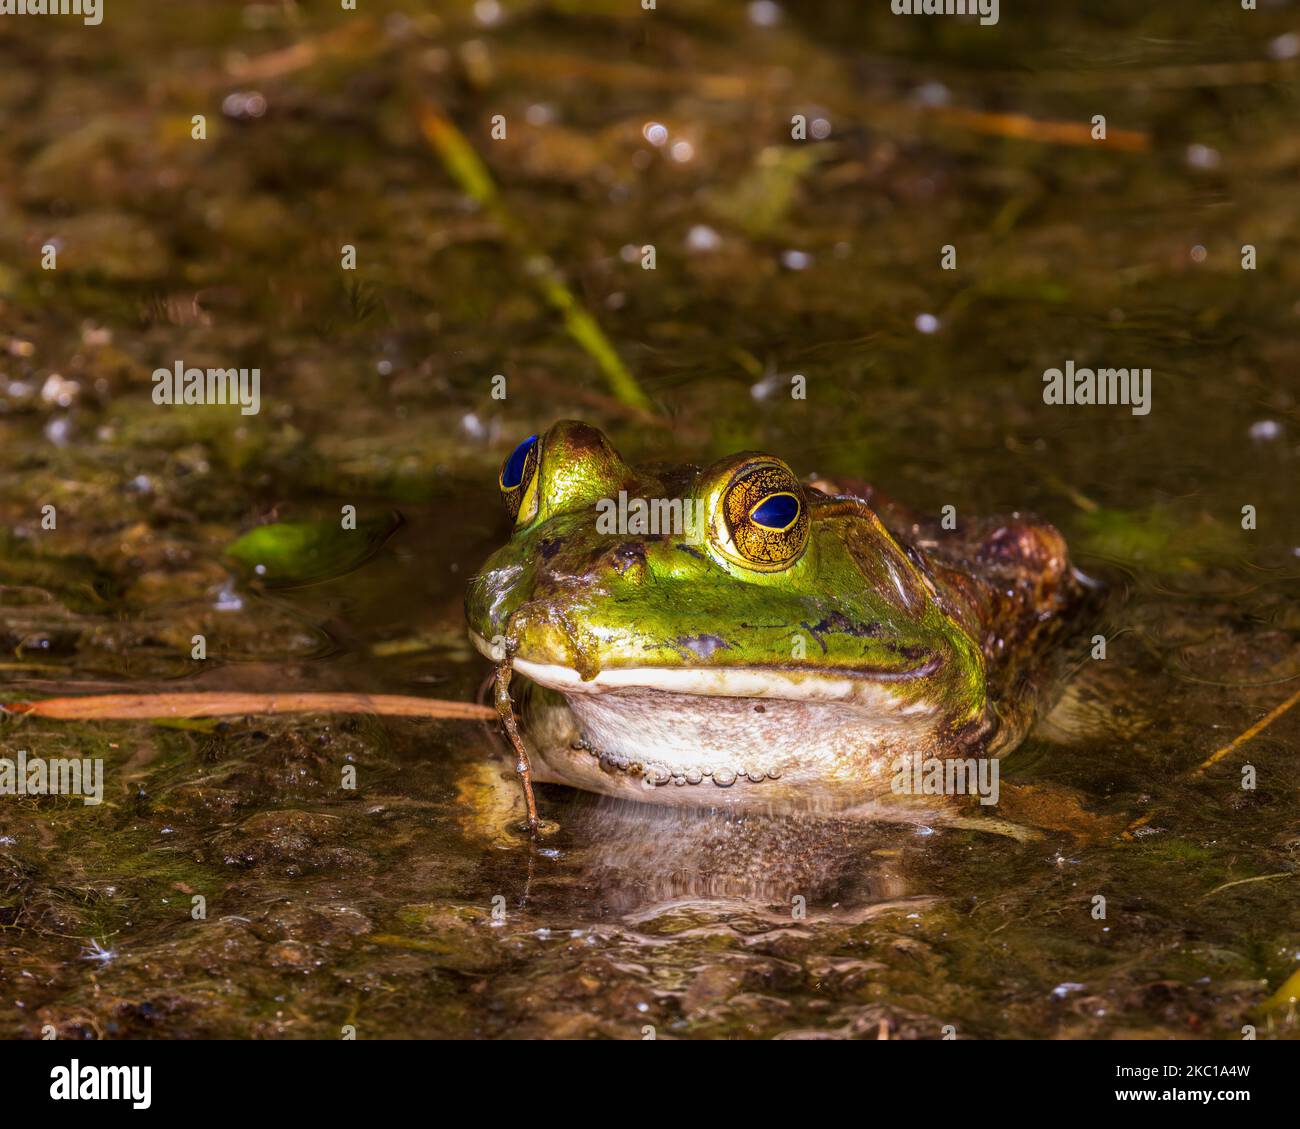 A closeup of American bullfrog (Lithobates catesbeianus) in the water with algae on its head Stock Photo